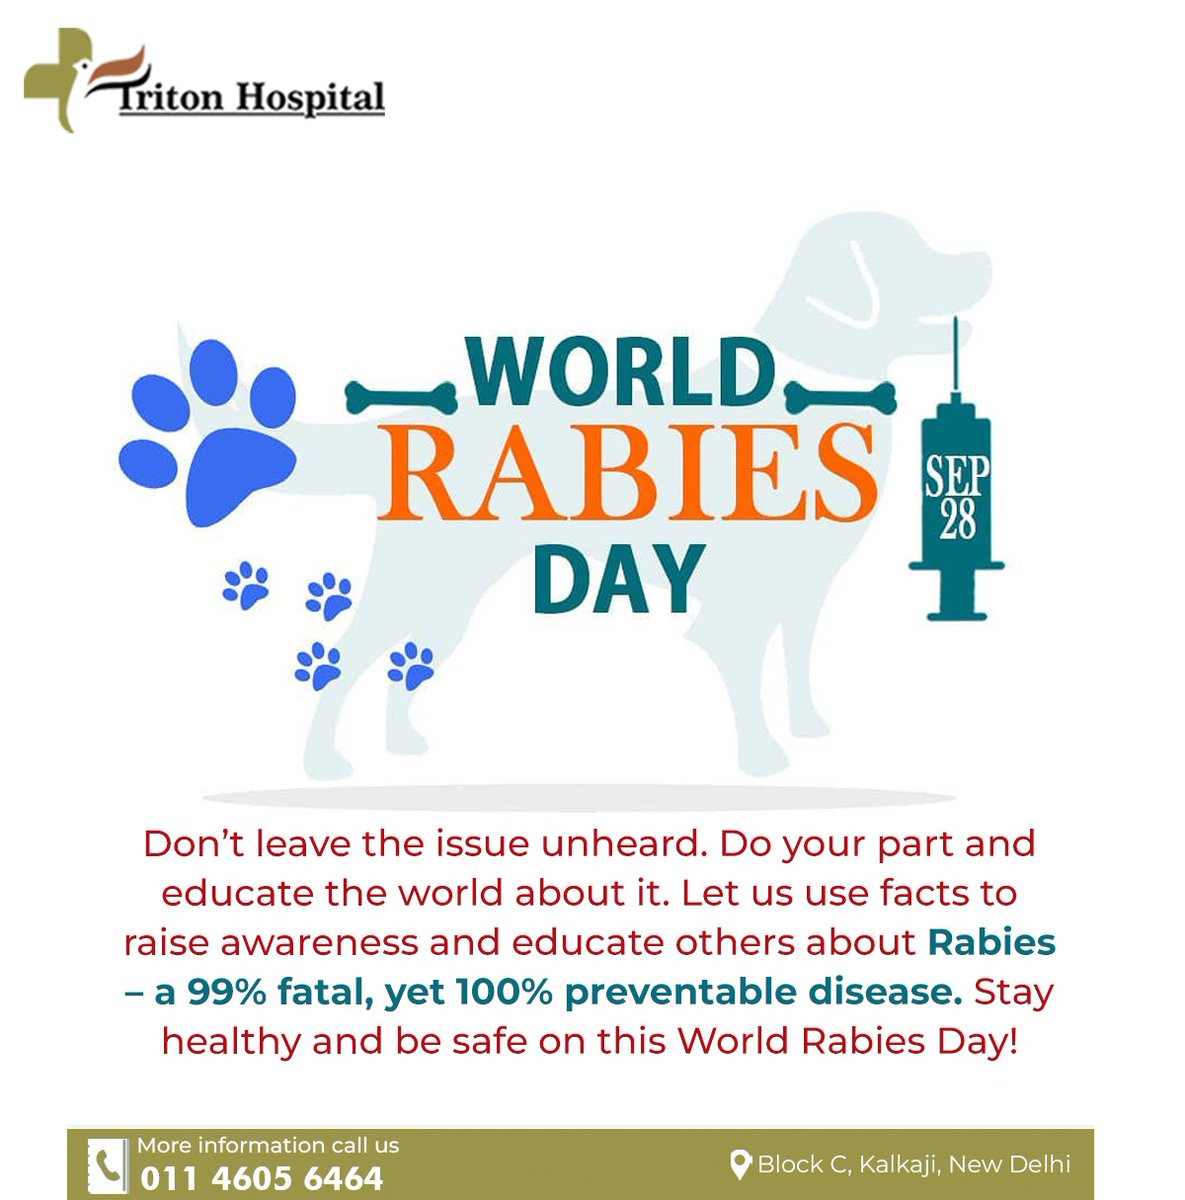 We all should make one promise to ourselves that no one should die of rabies and that would be the perfect way to celebrate World Rabies Day
.
.
.
#WorldRabiesDay #TritonHospital #BestHospitalinDelhi #HospitalInDelhi #MultispecialtyHospitalInDelhi #newlife #consultation...